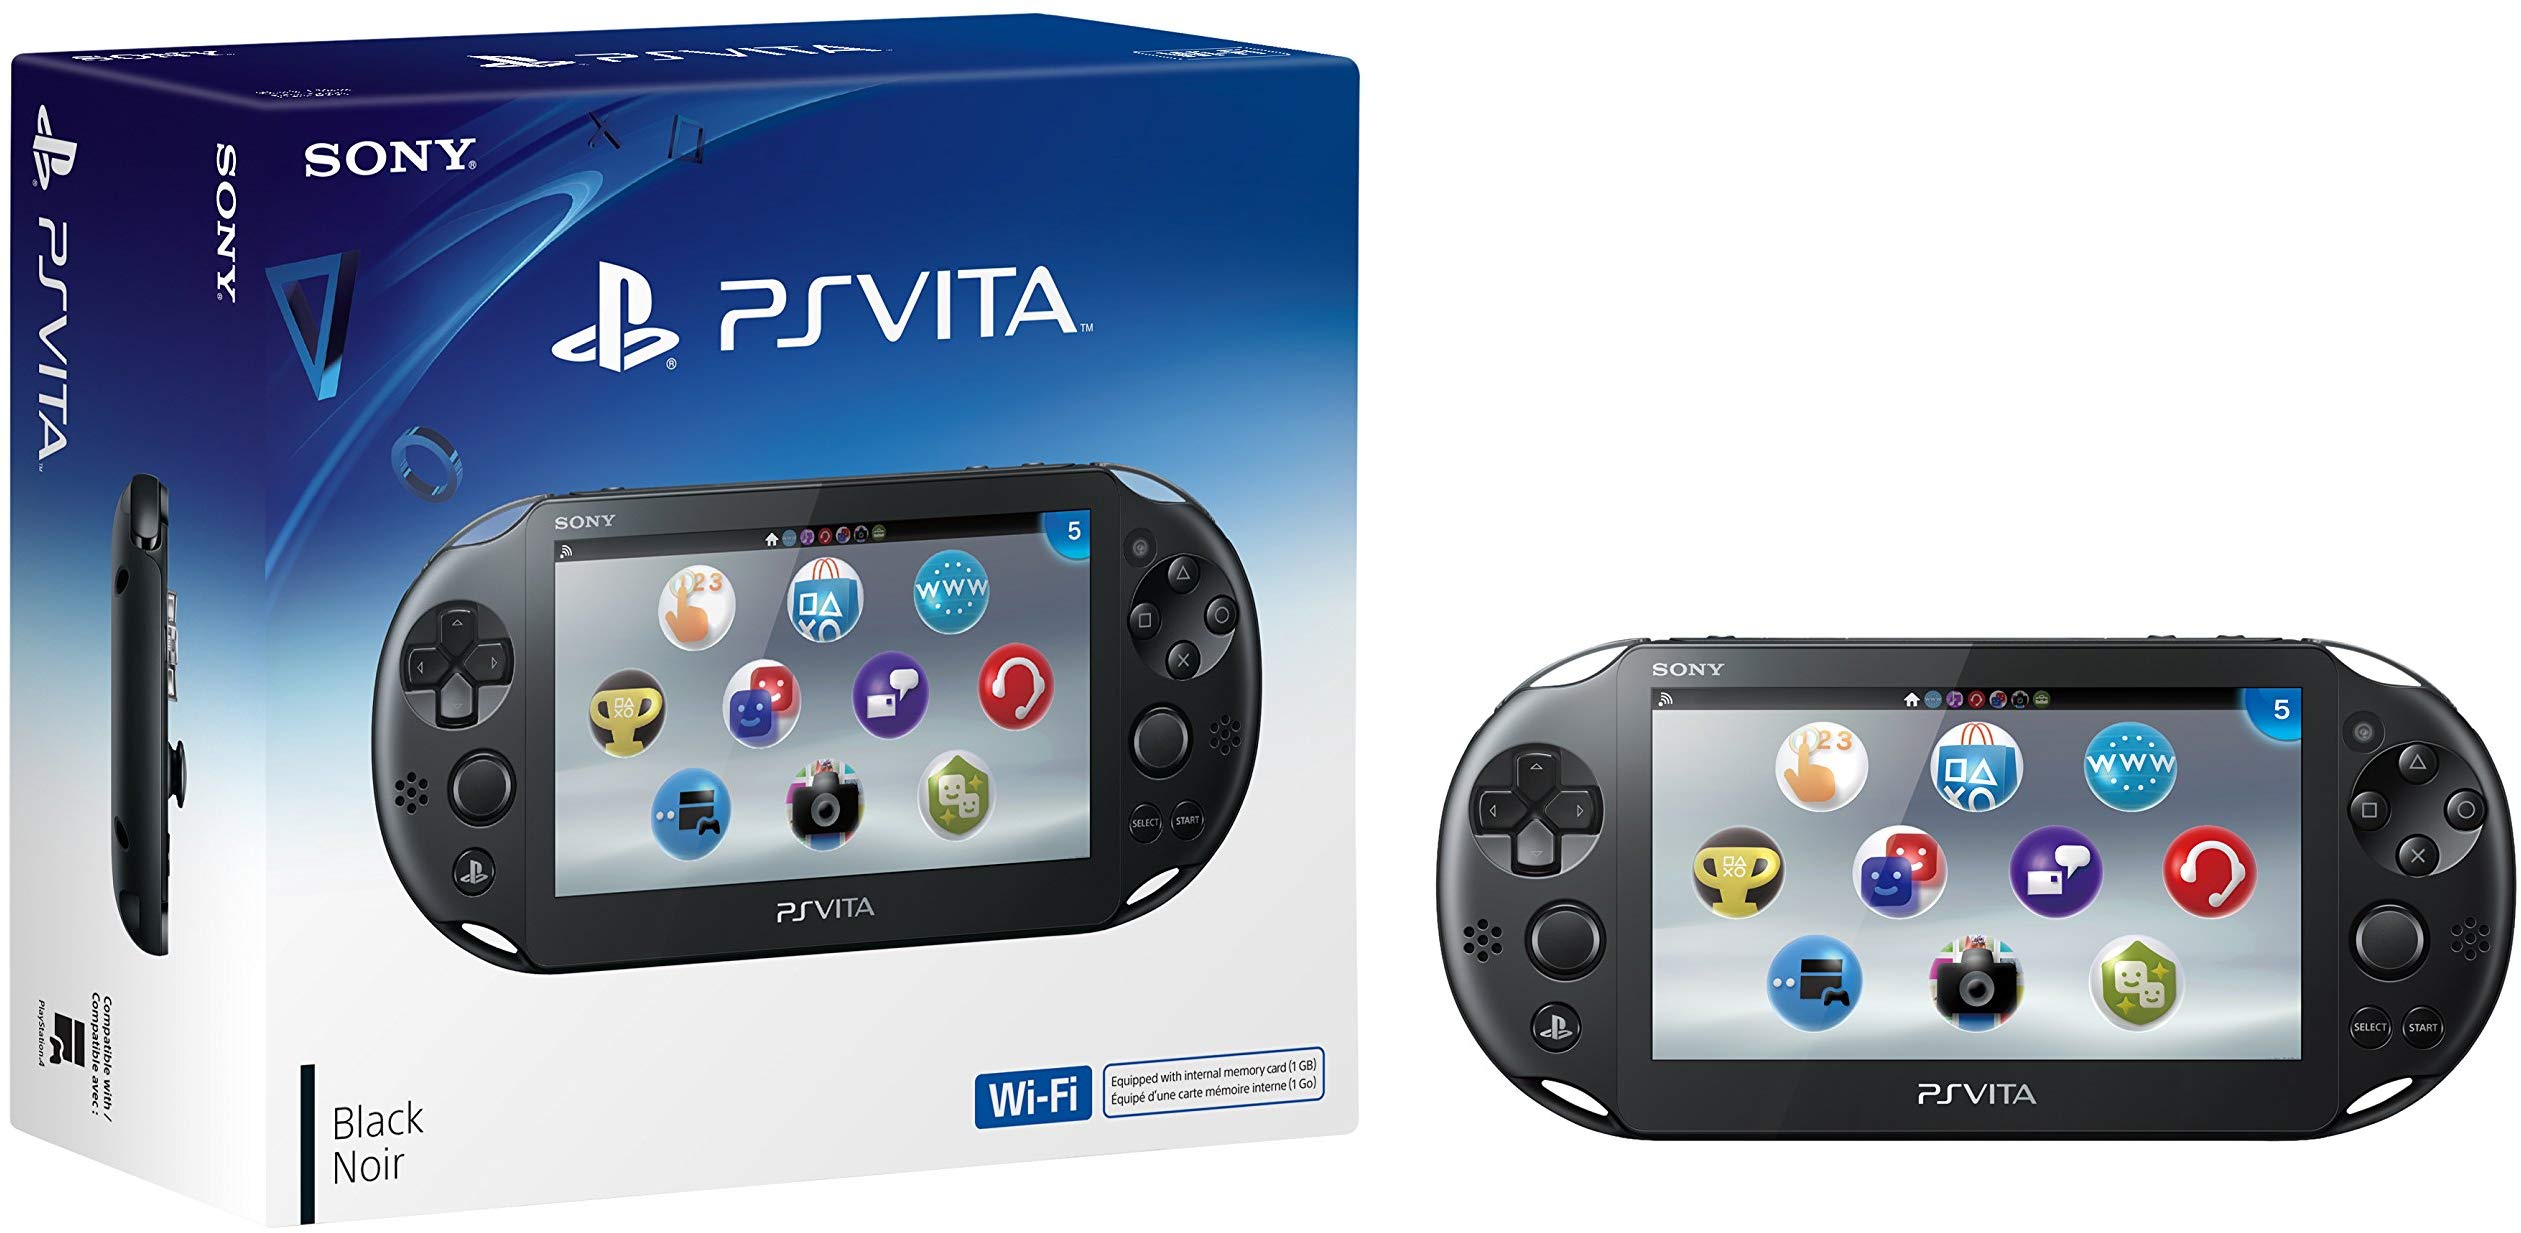 Sony Has Discontinued the PlayStation Vita After 8 Years